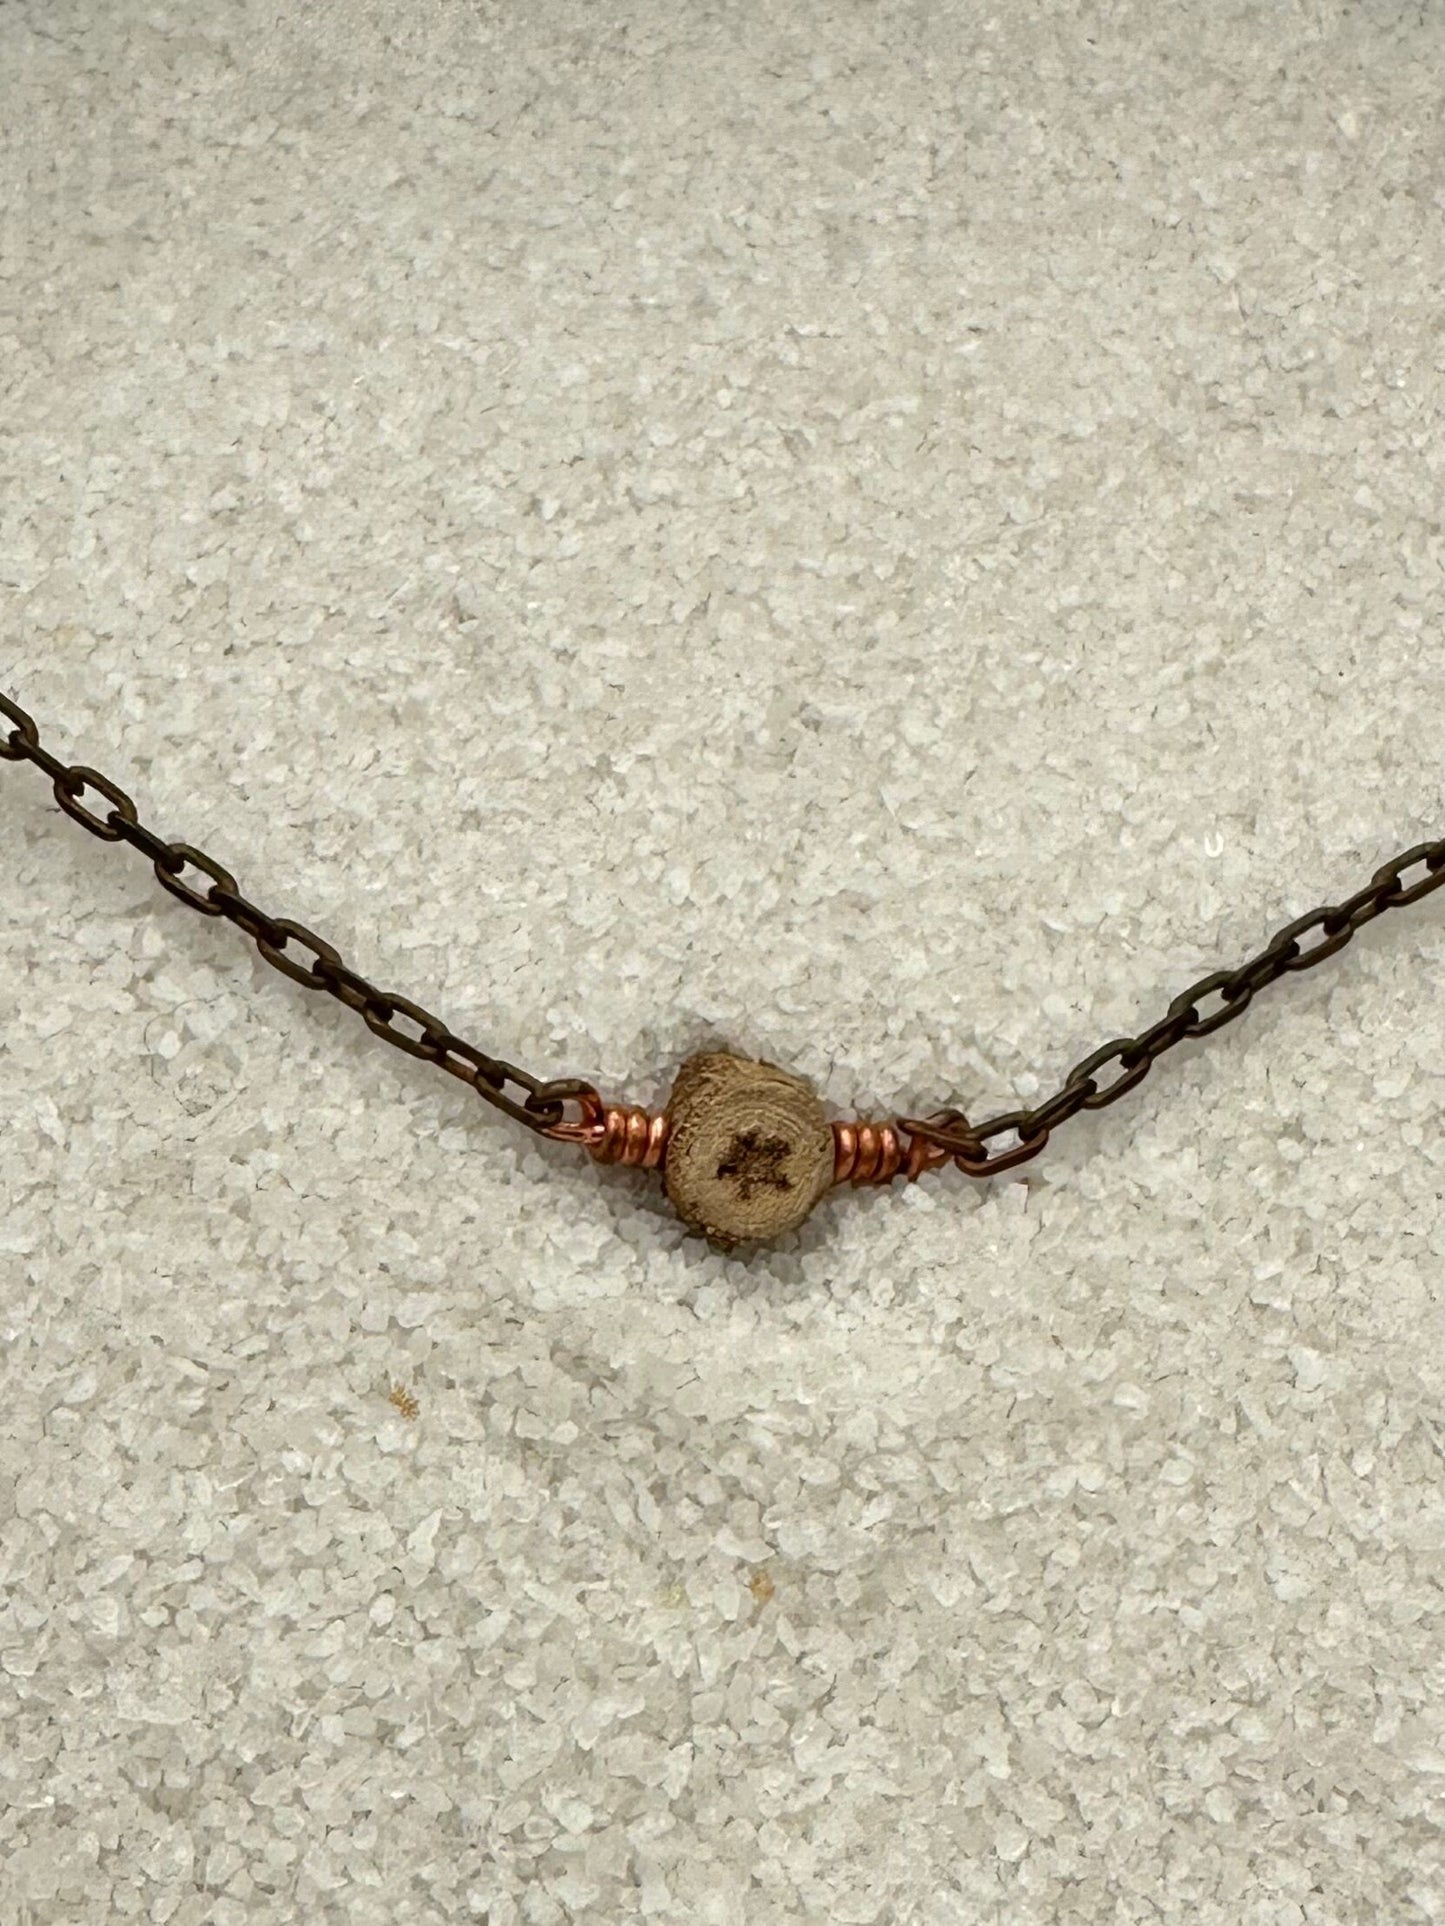 Stars in Branches Copper Necklace Naturally Occurring Star